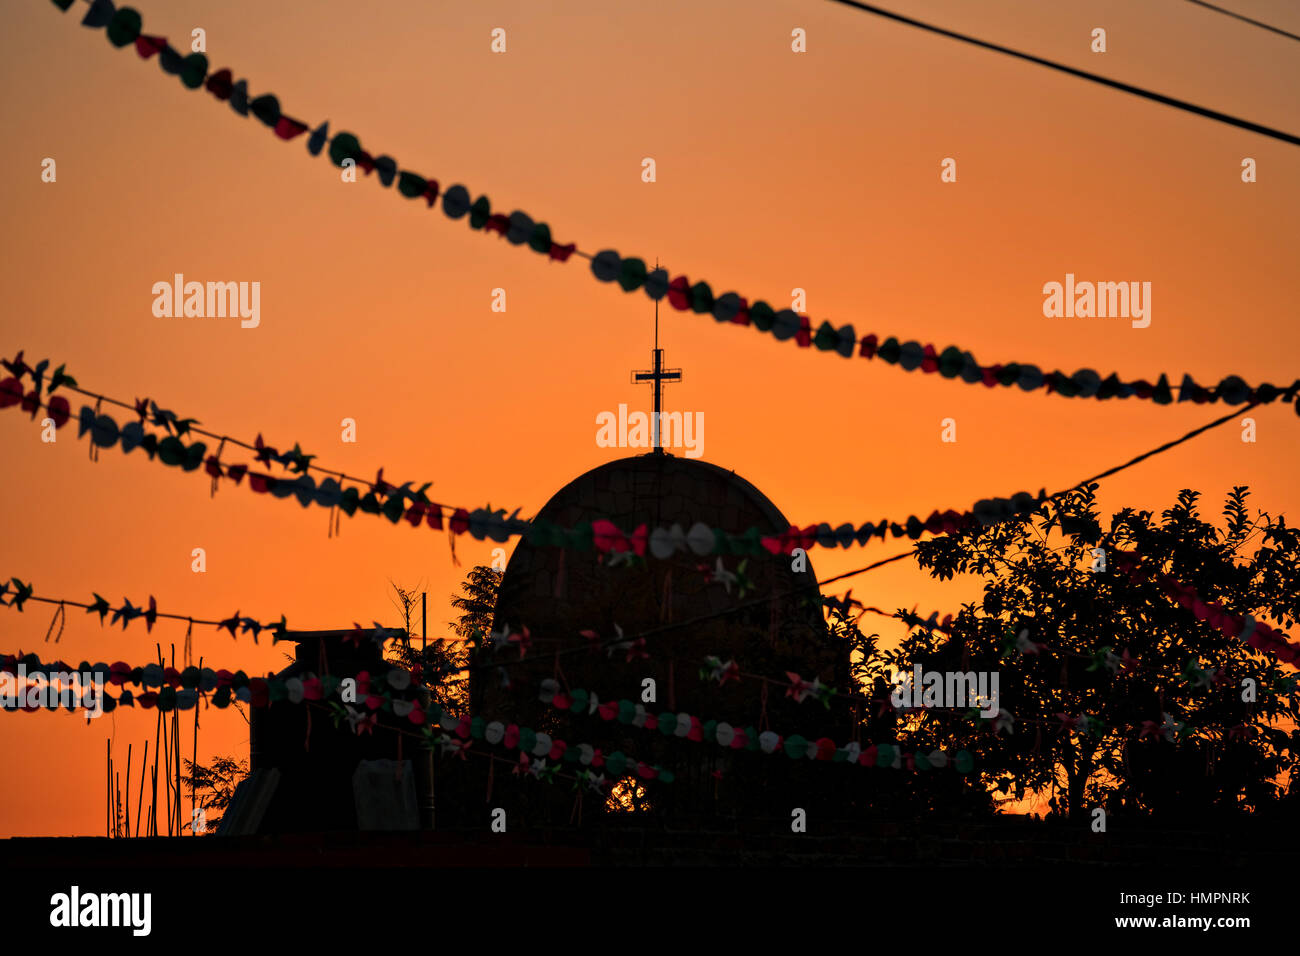 Sunset over a church at a village stop along the road during the annual Cabalgata de Cristo Rey pilgrimage January 4, 2017 in La Sauceda, Guanajuato, Mexico. Thousands of Mexican cowboys and horse take part in the three-day ride to the mountaintop shrine of Cristo Rey stopping along the way at shrines and churches. Stock Photo